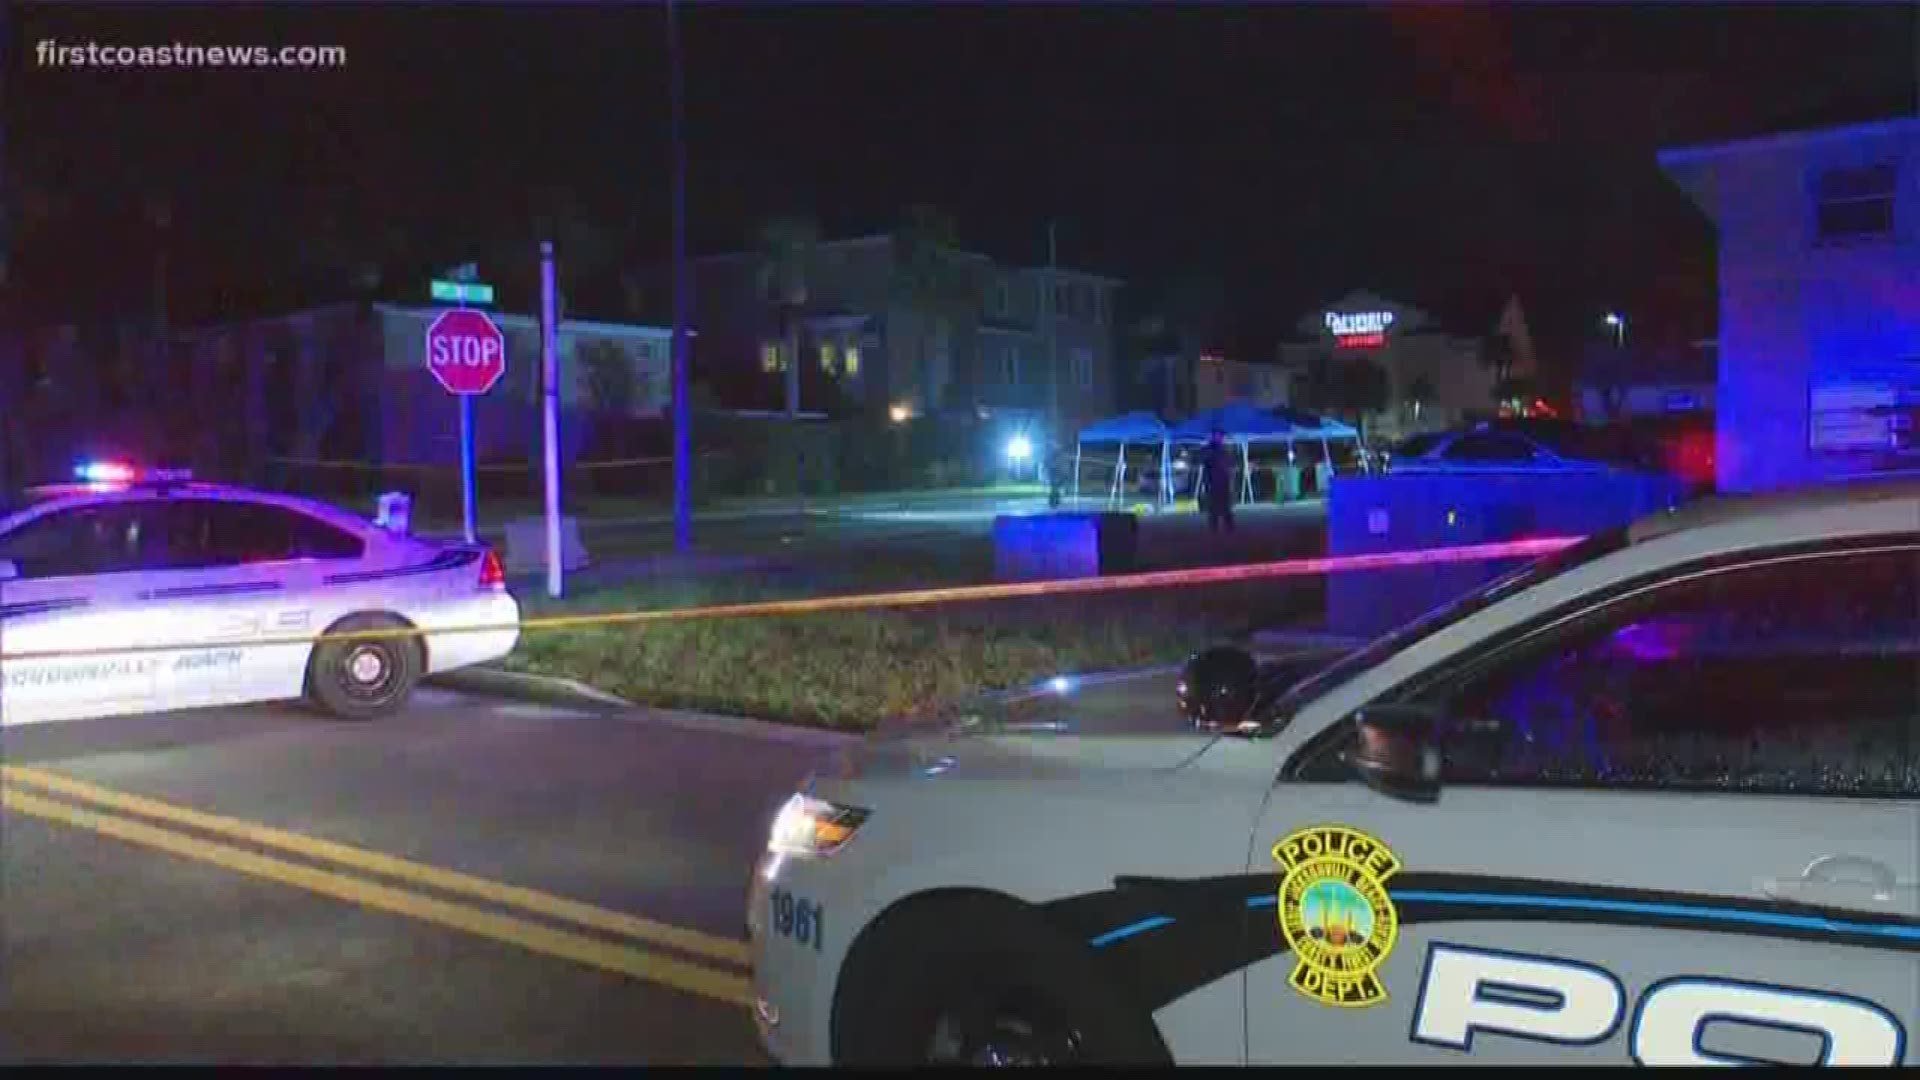 The Jacksonville Police Department said the shooting happened at 17th Avenue North and Second Street North. It was reported to police before 11 p.m.